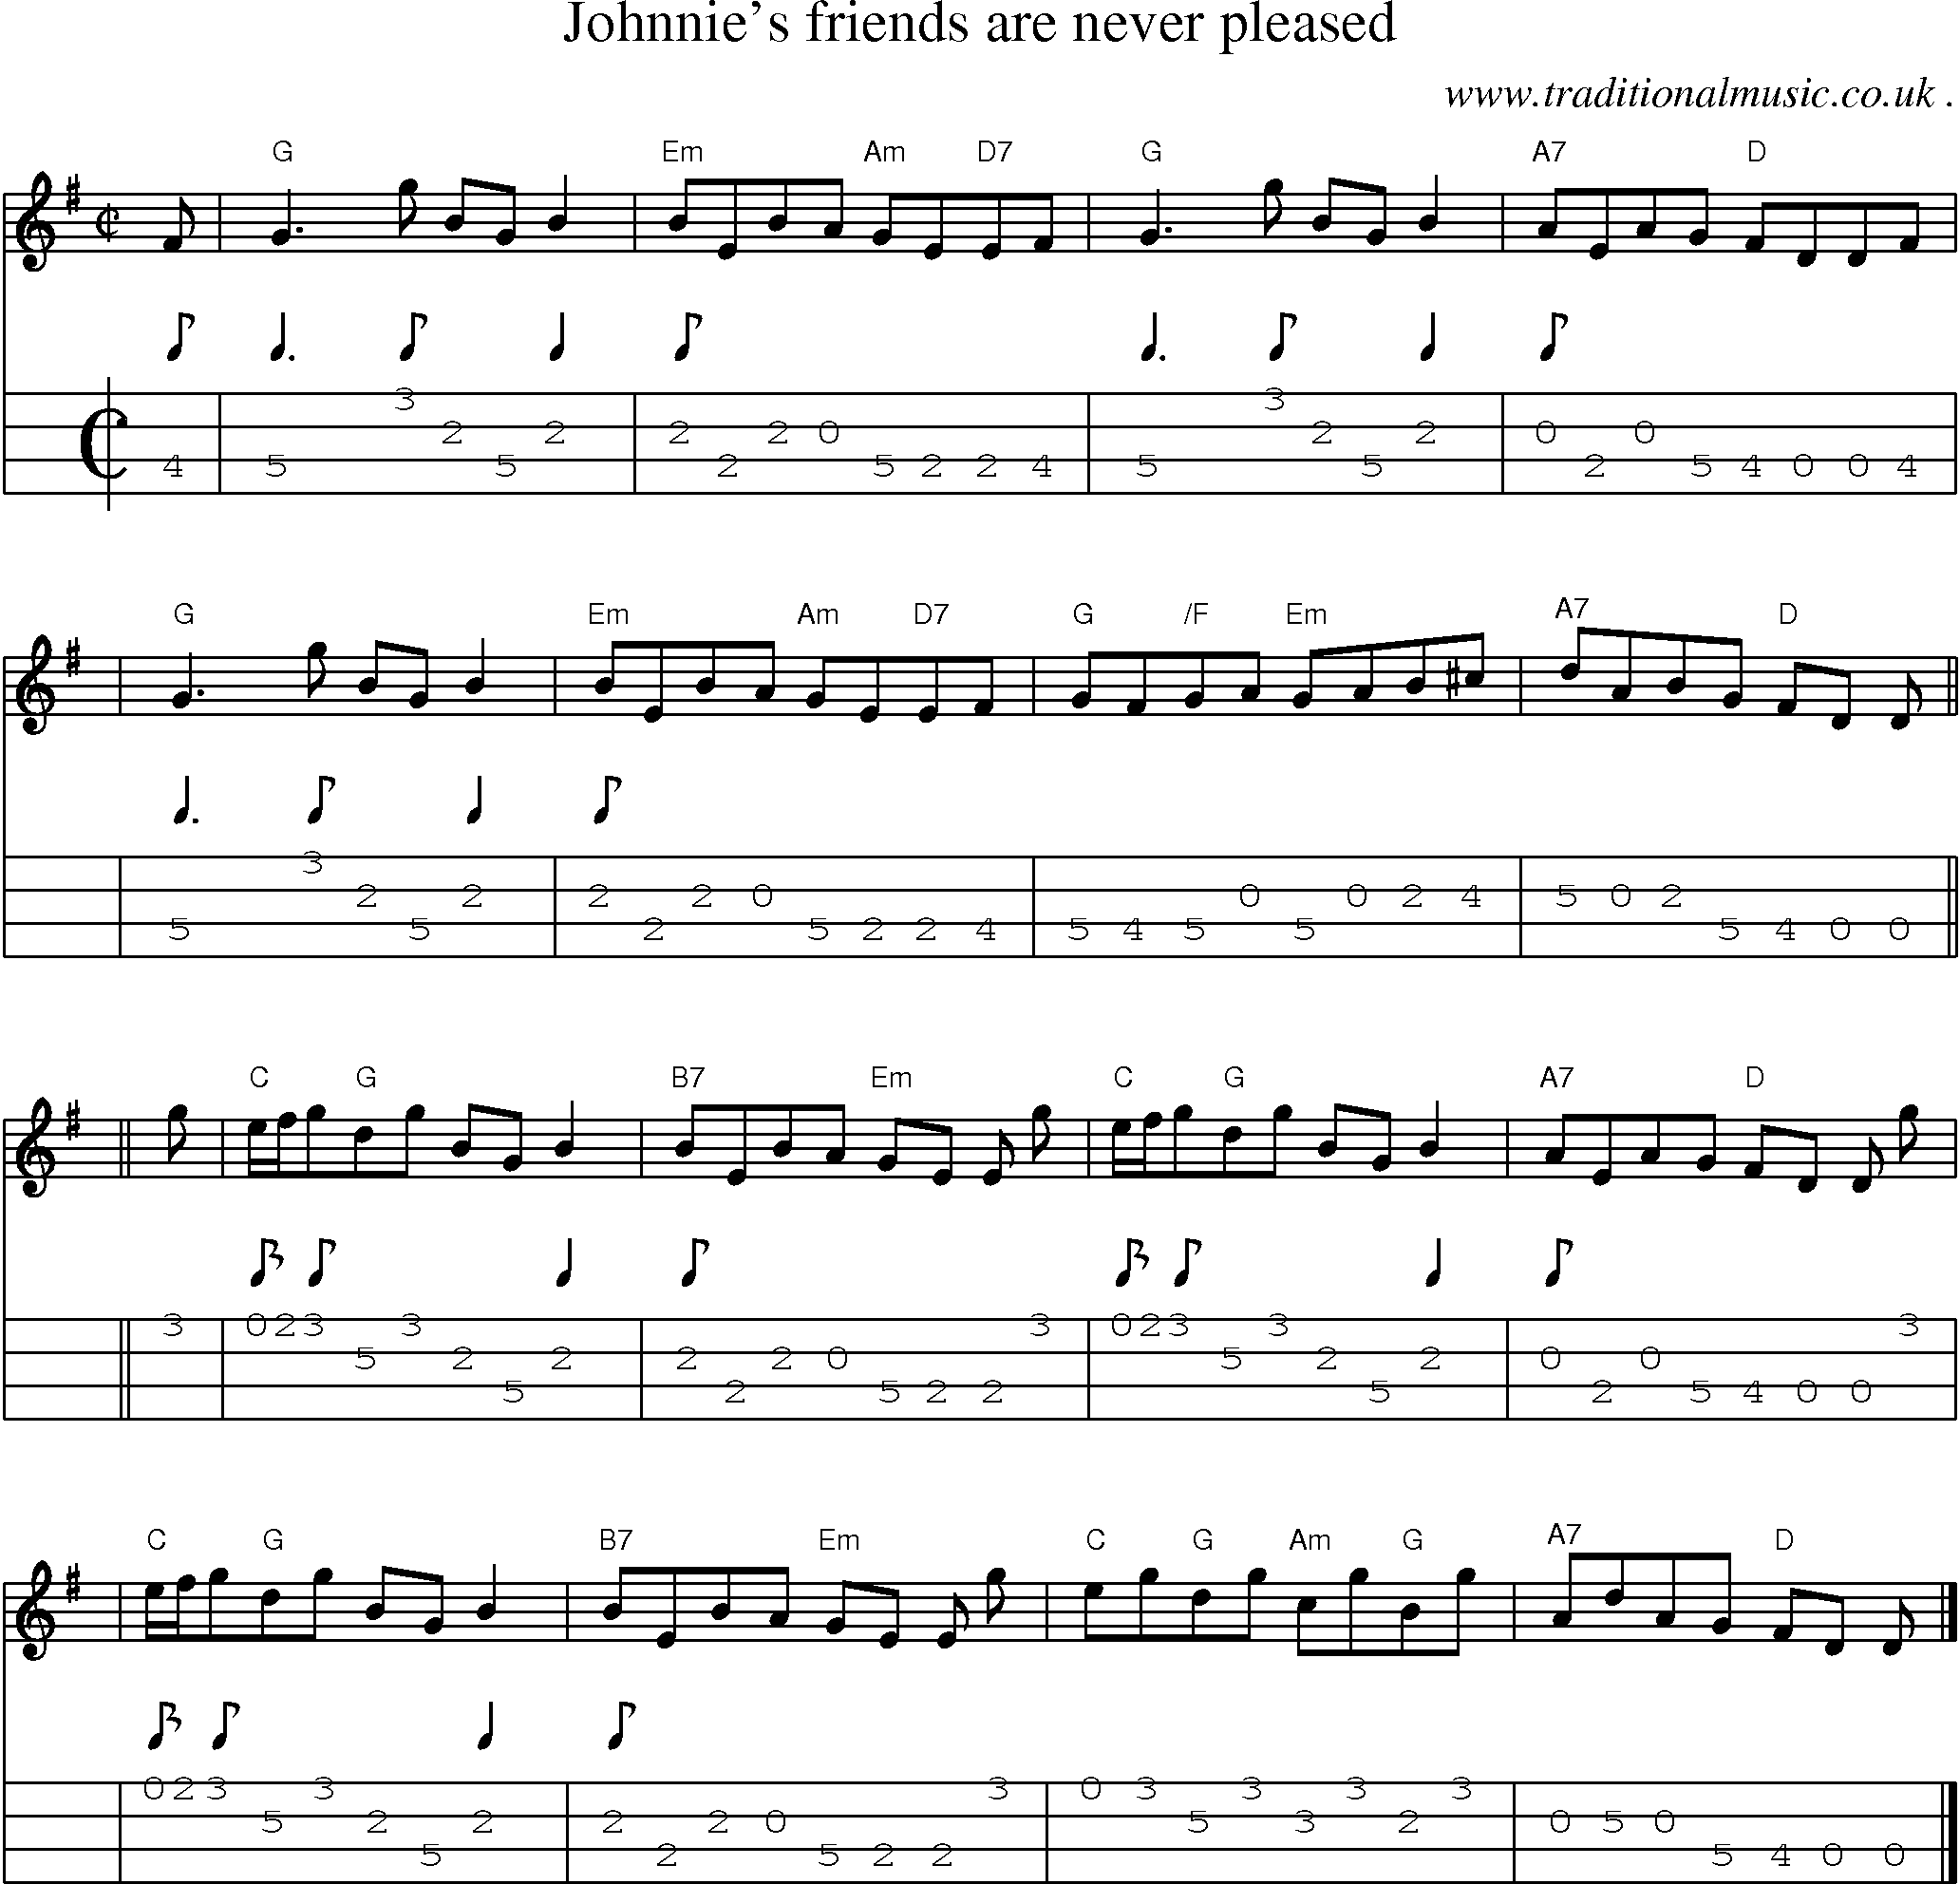 Sheet-music  score, Chords and Mandolin Tabs for Johnnies Friends Are Never Pleased